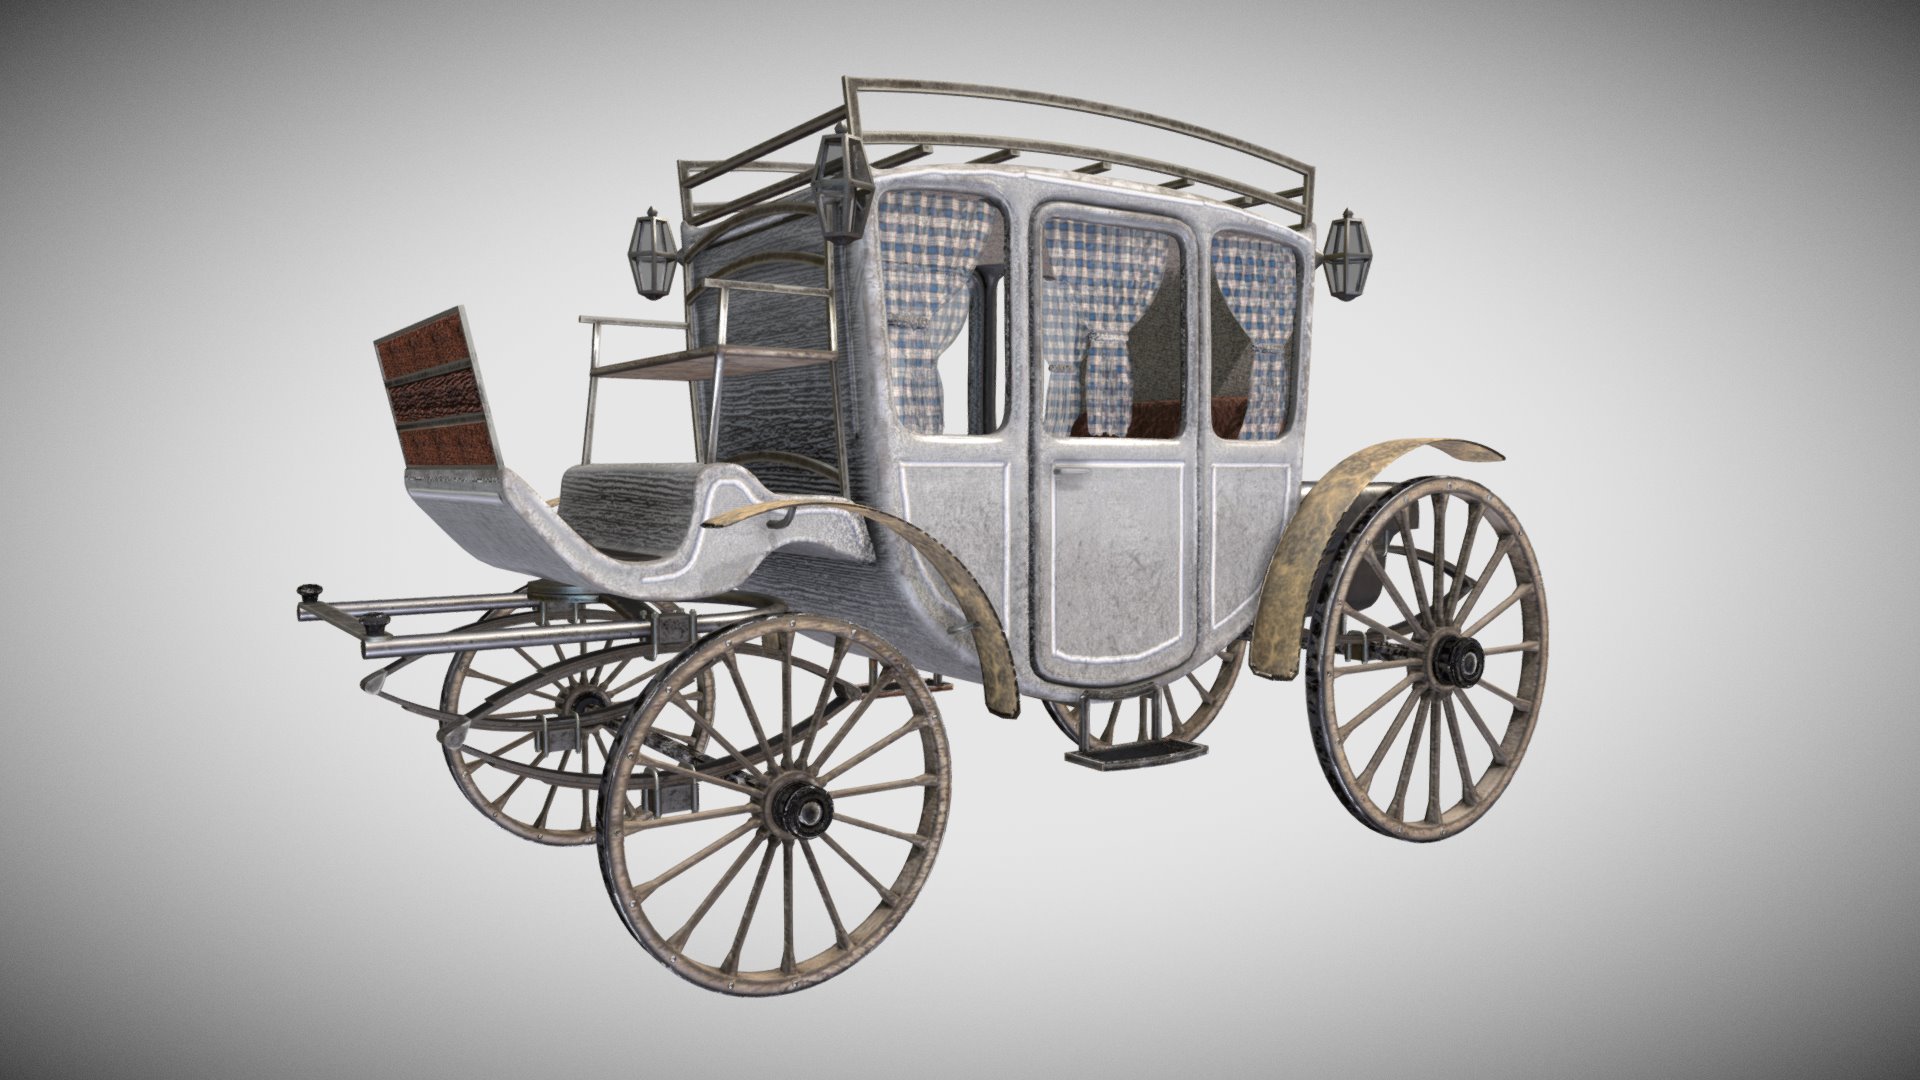 3D model Diligence – One Material - This is a 3D model of the Diligence - One Material. The 3D model is about a carriage with wheels.